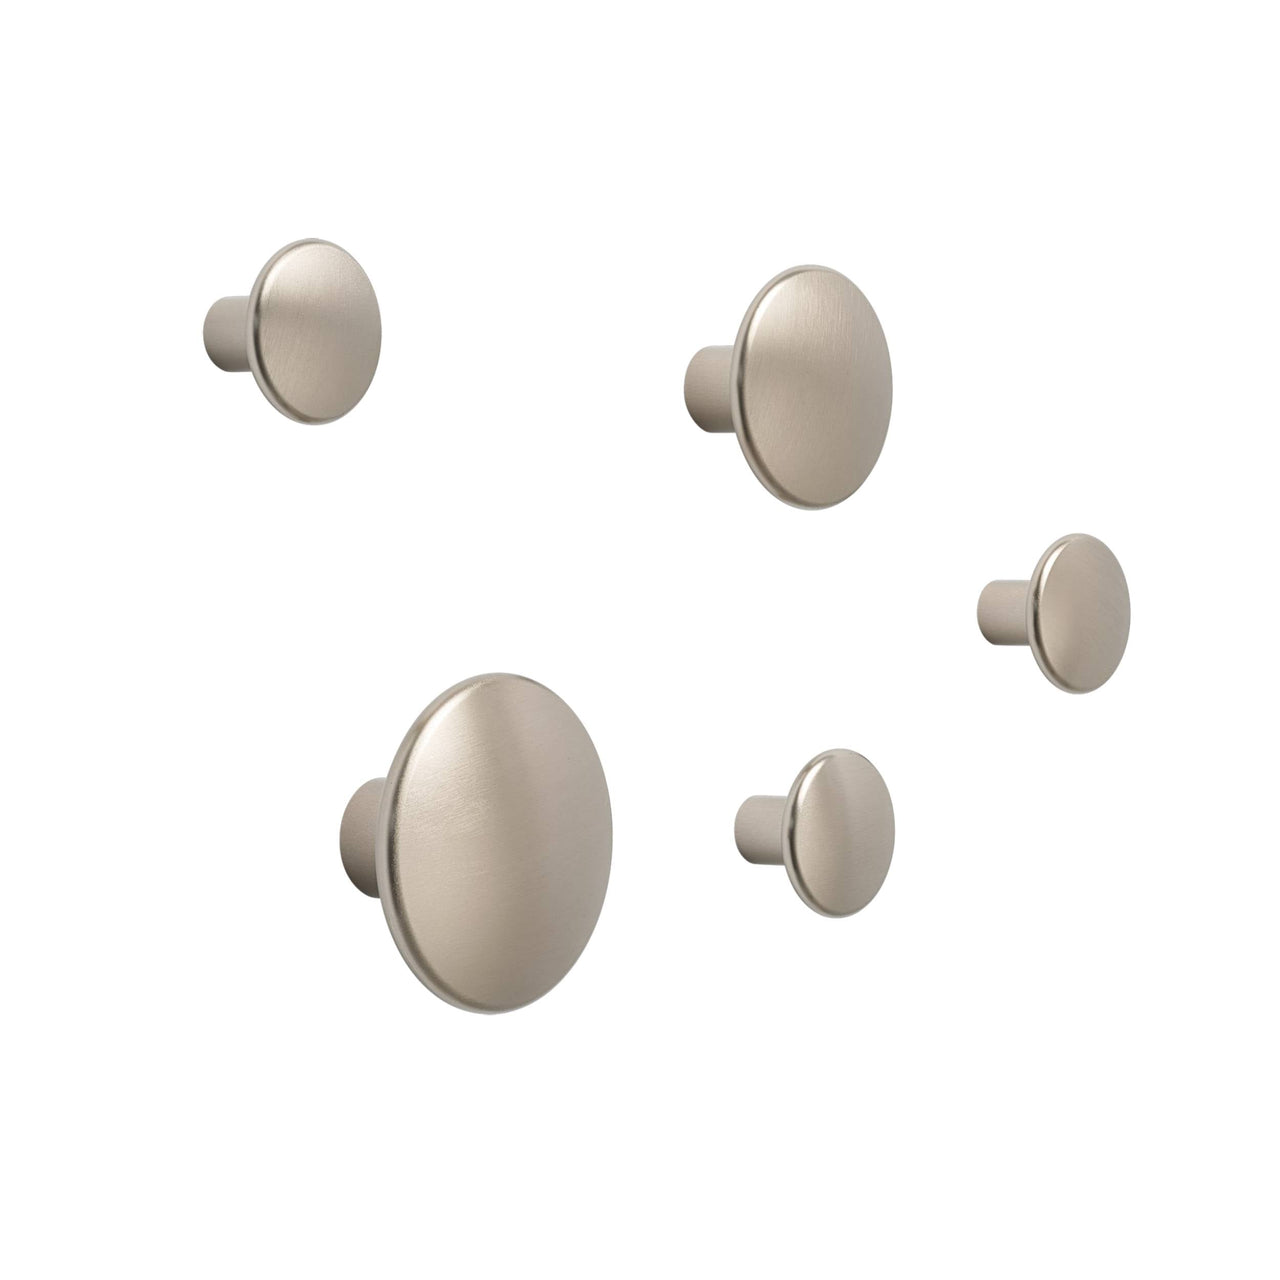 The Dots Metal Coat Hooks: Mixed Set of 5 + Taupe